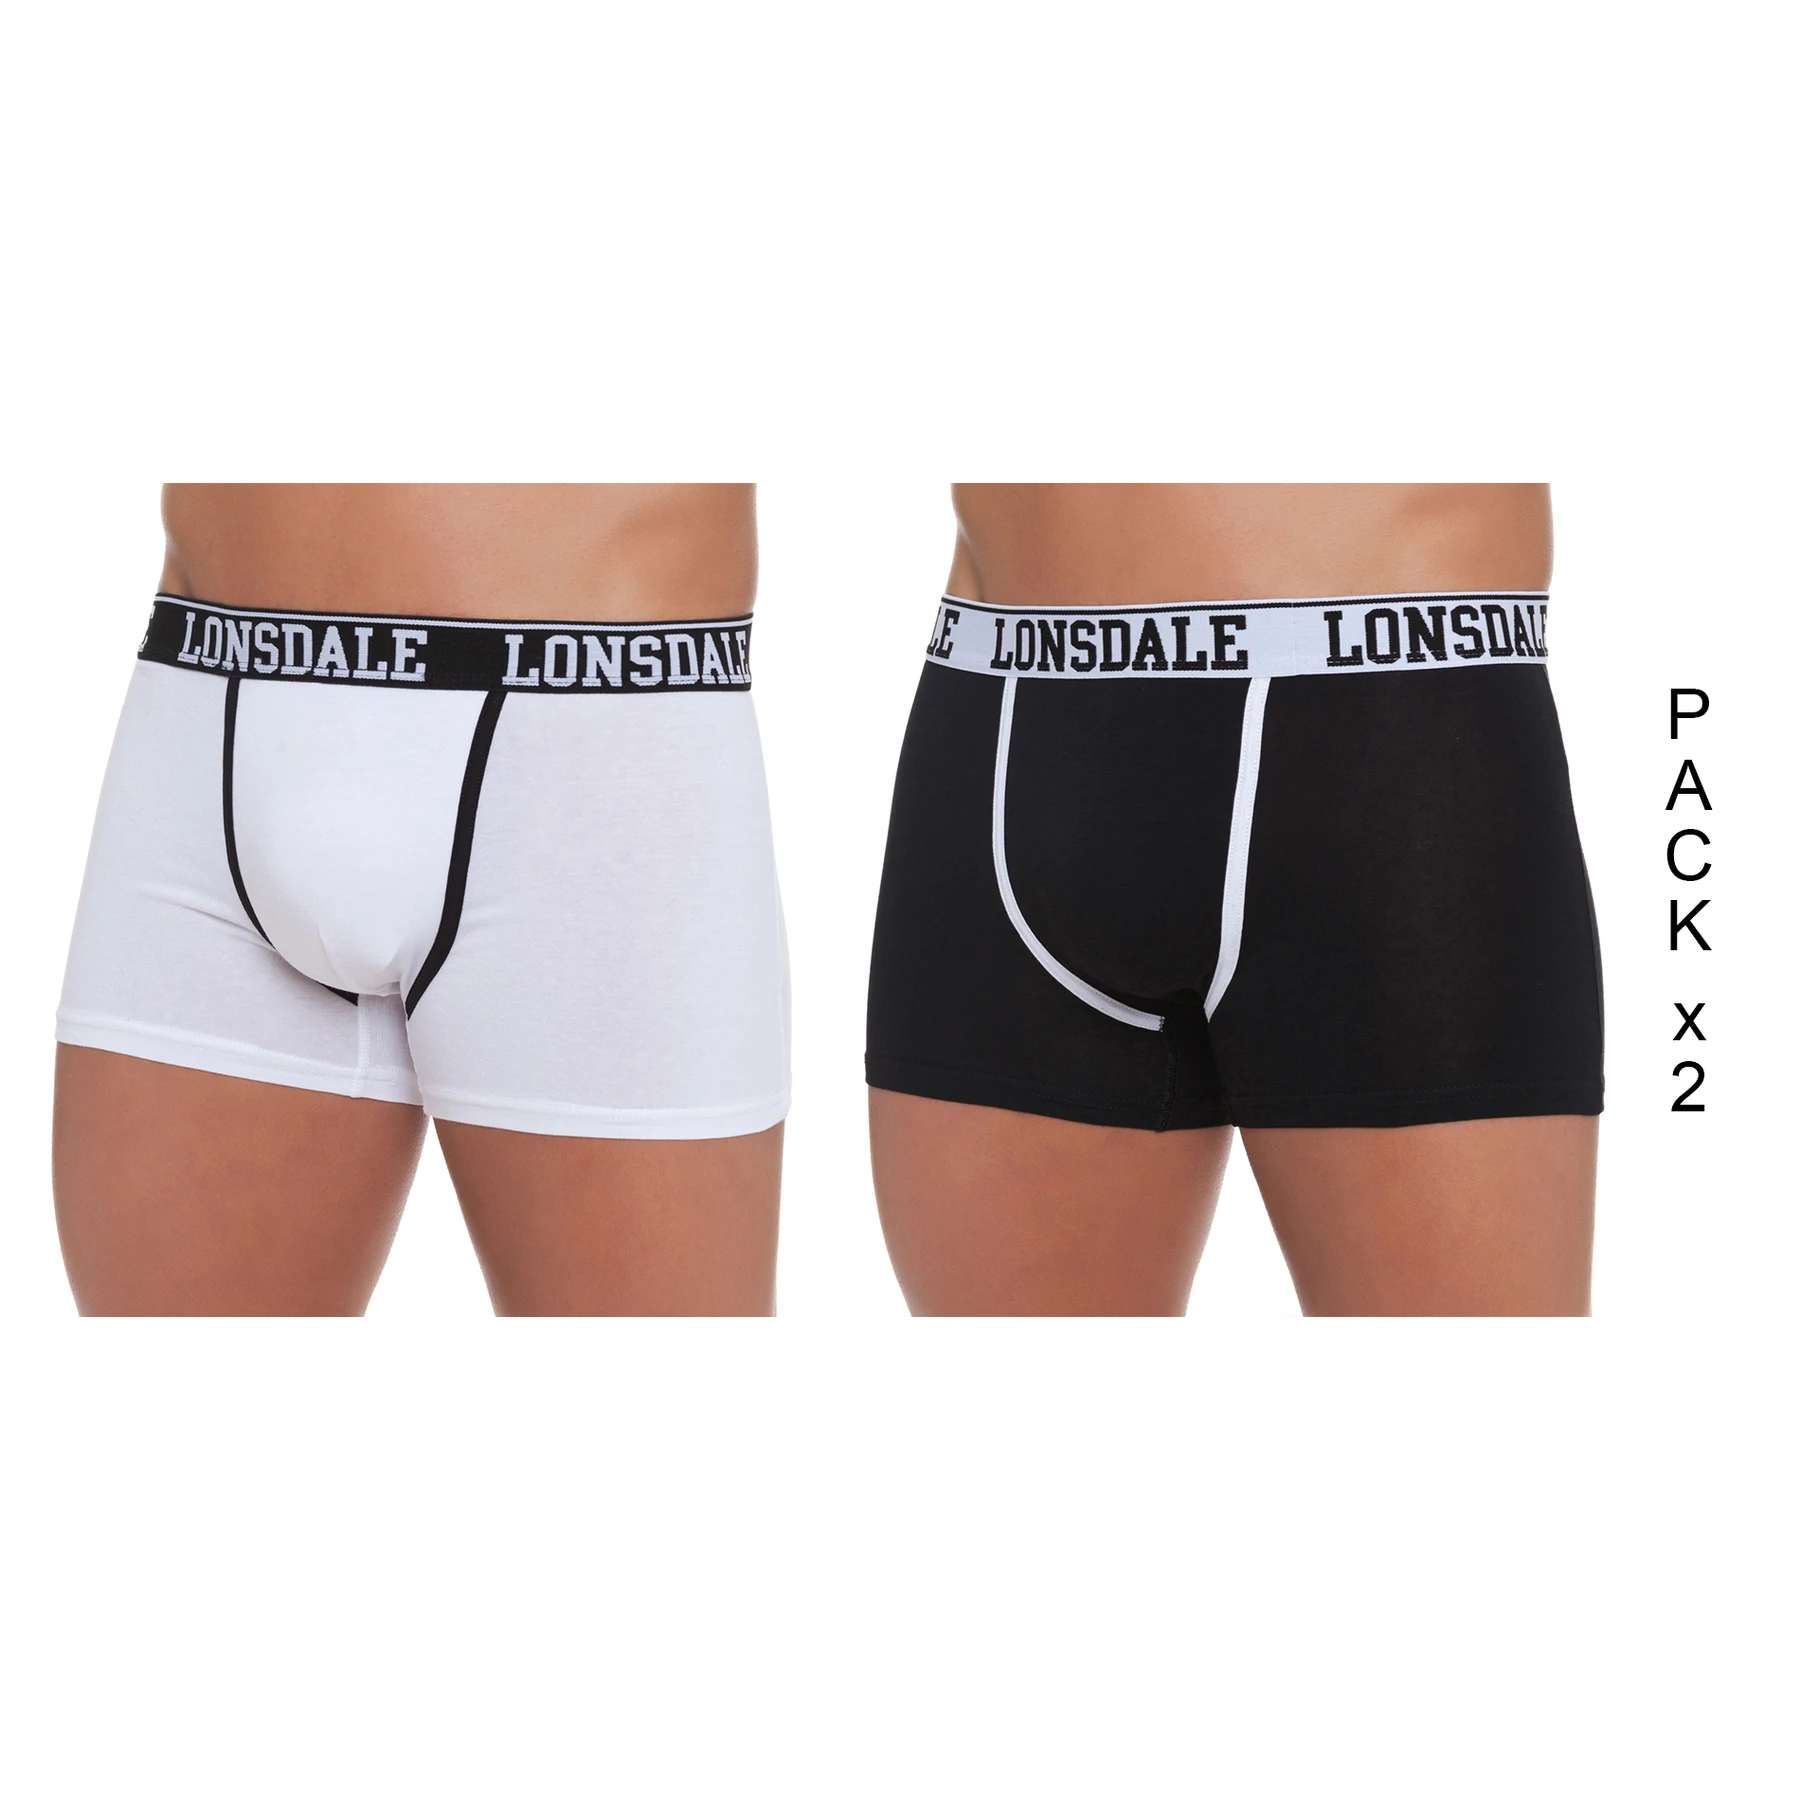 Lonsdale Briefs Boxers For Men's Linnen Inside A Package Two Pairs Calvin